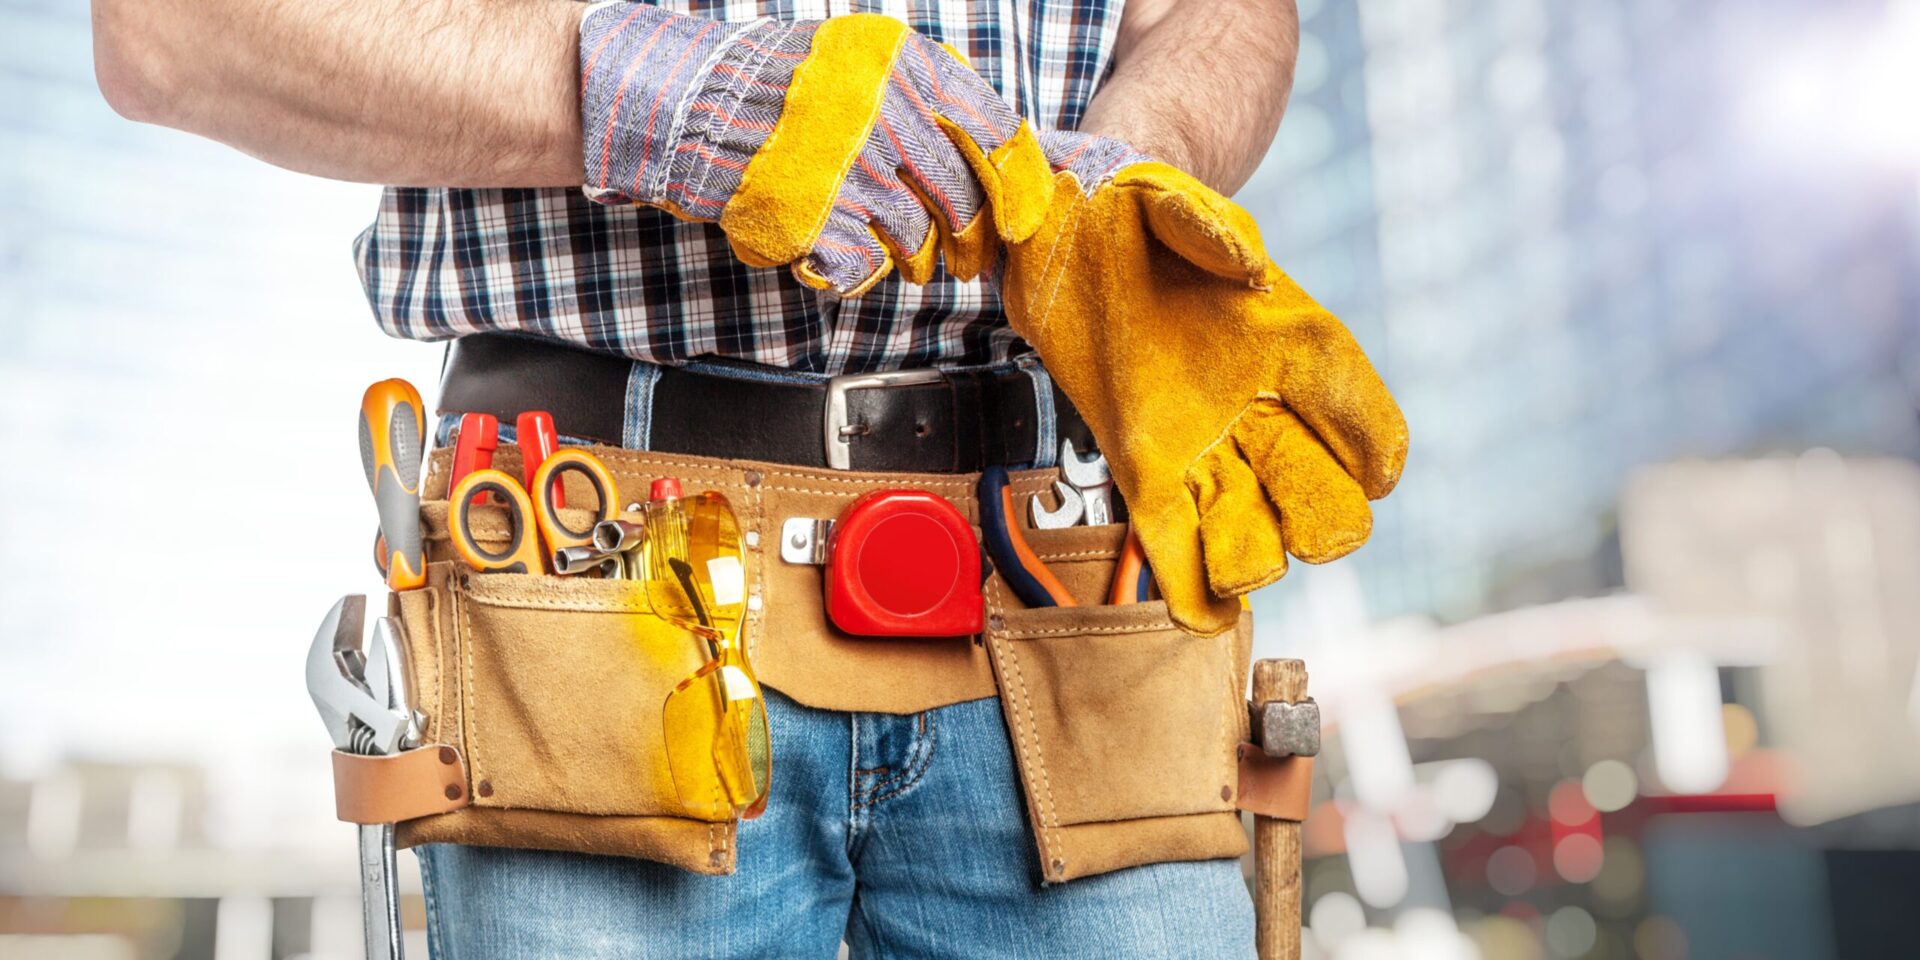 Steps to Begin Your Own Handyman Business